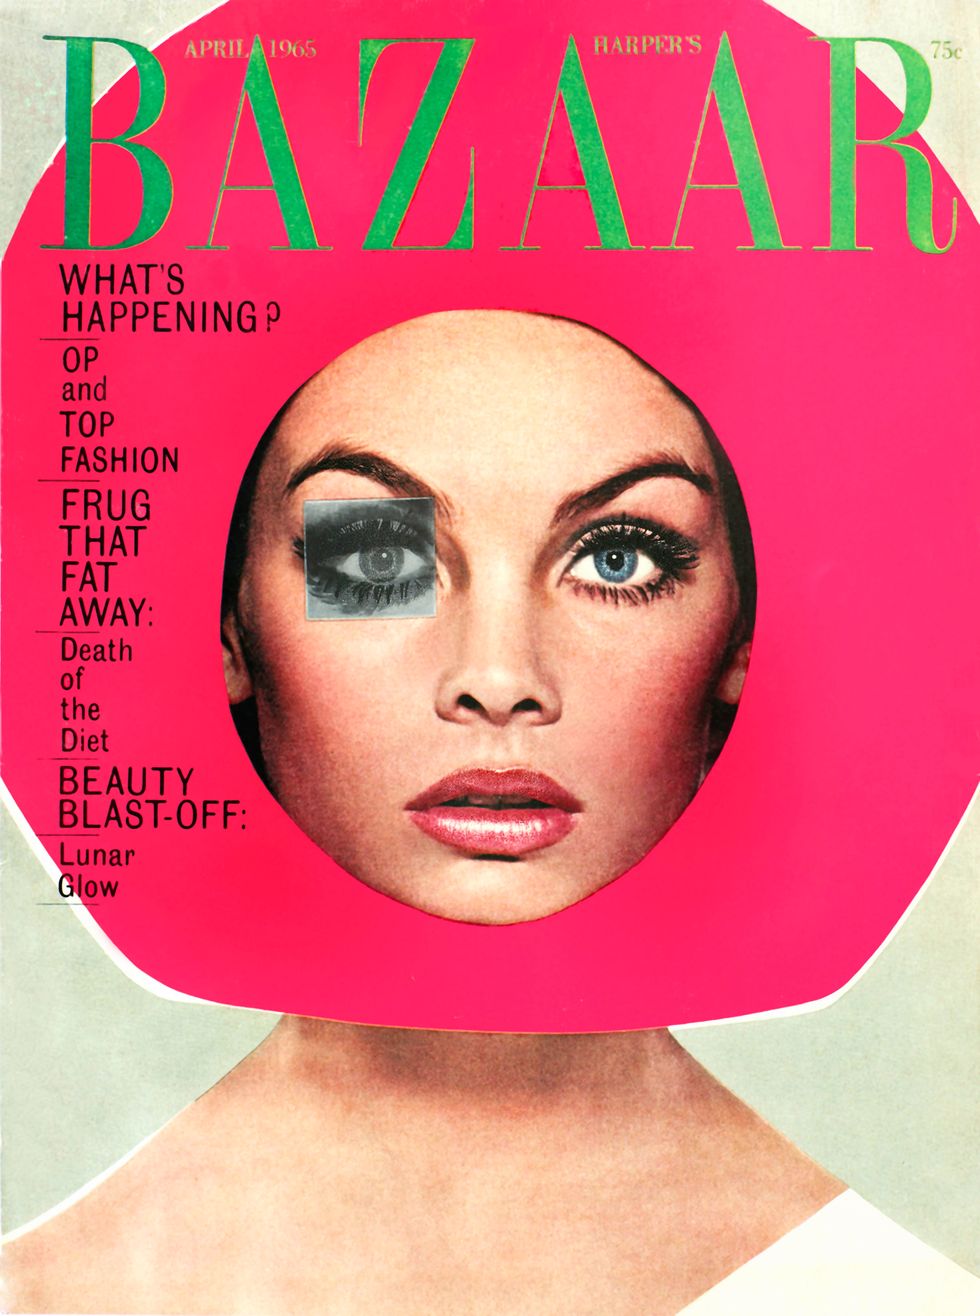 Ruth Ansel's 1965 cover, featuring Jean Shrimpton